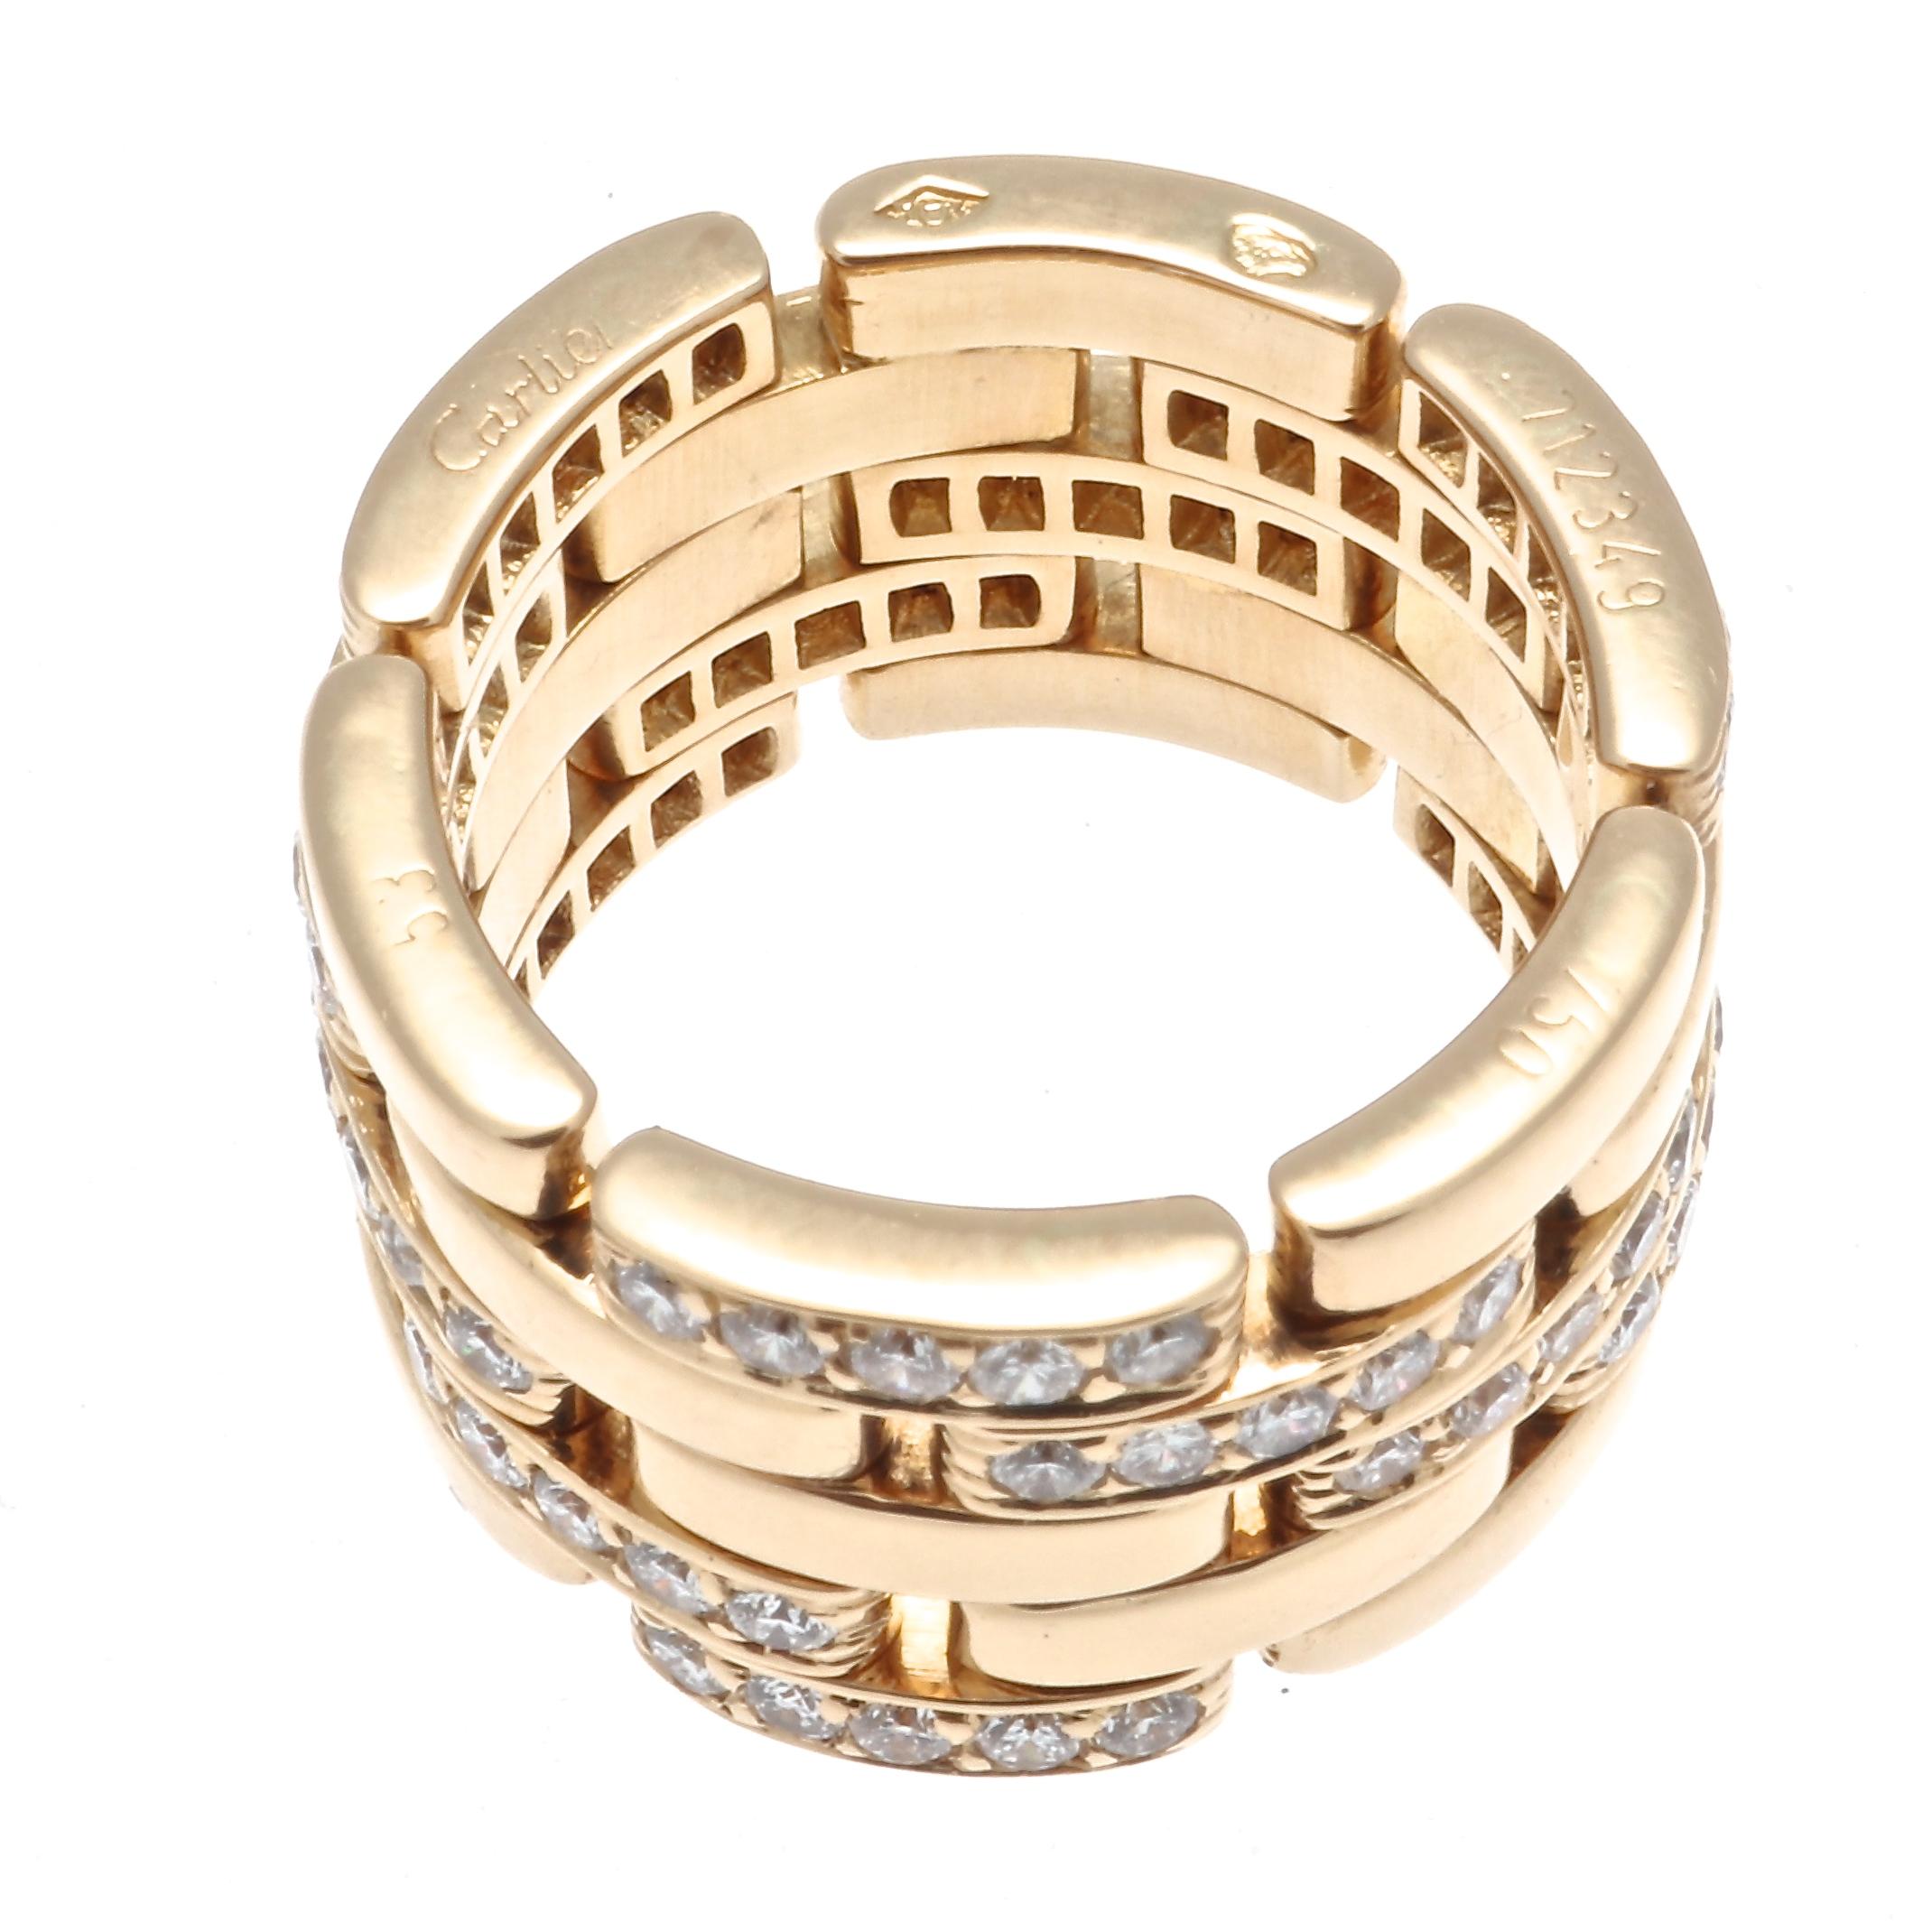 A famous link design named after Cartier's emblematic animal. The pieces sensually wrap around the finger in a feline fashion. Featuring 5 rows of alternating diamond and gold links. Signed Cartier, numbered and stamped with French hallmarks. Ring